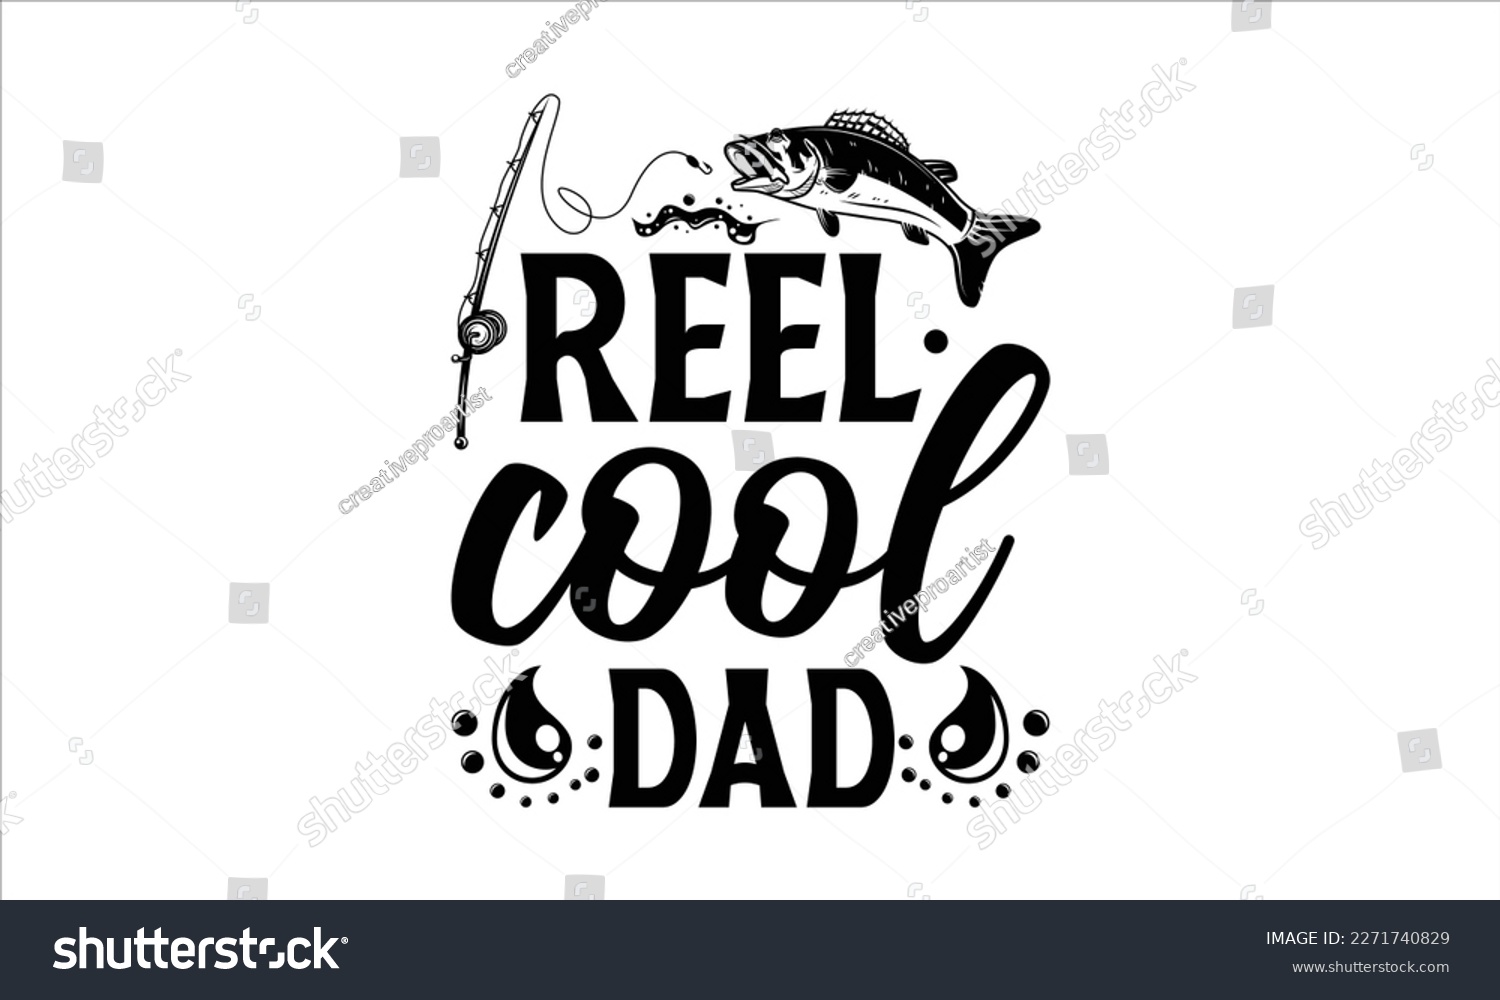 SVG of reel cool dad- Father's Day svg design, Hand drawn lettering phrase isolated on white background, Illustration for prints on t-shirts and bags, posters, cards eps 10. svg